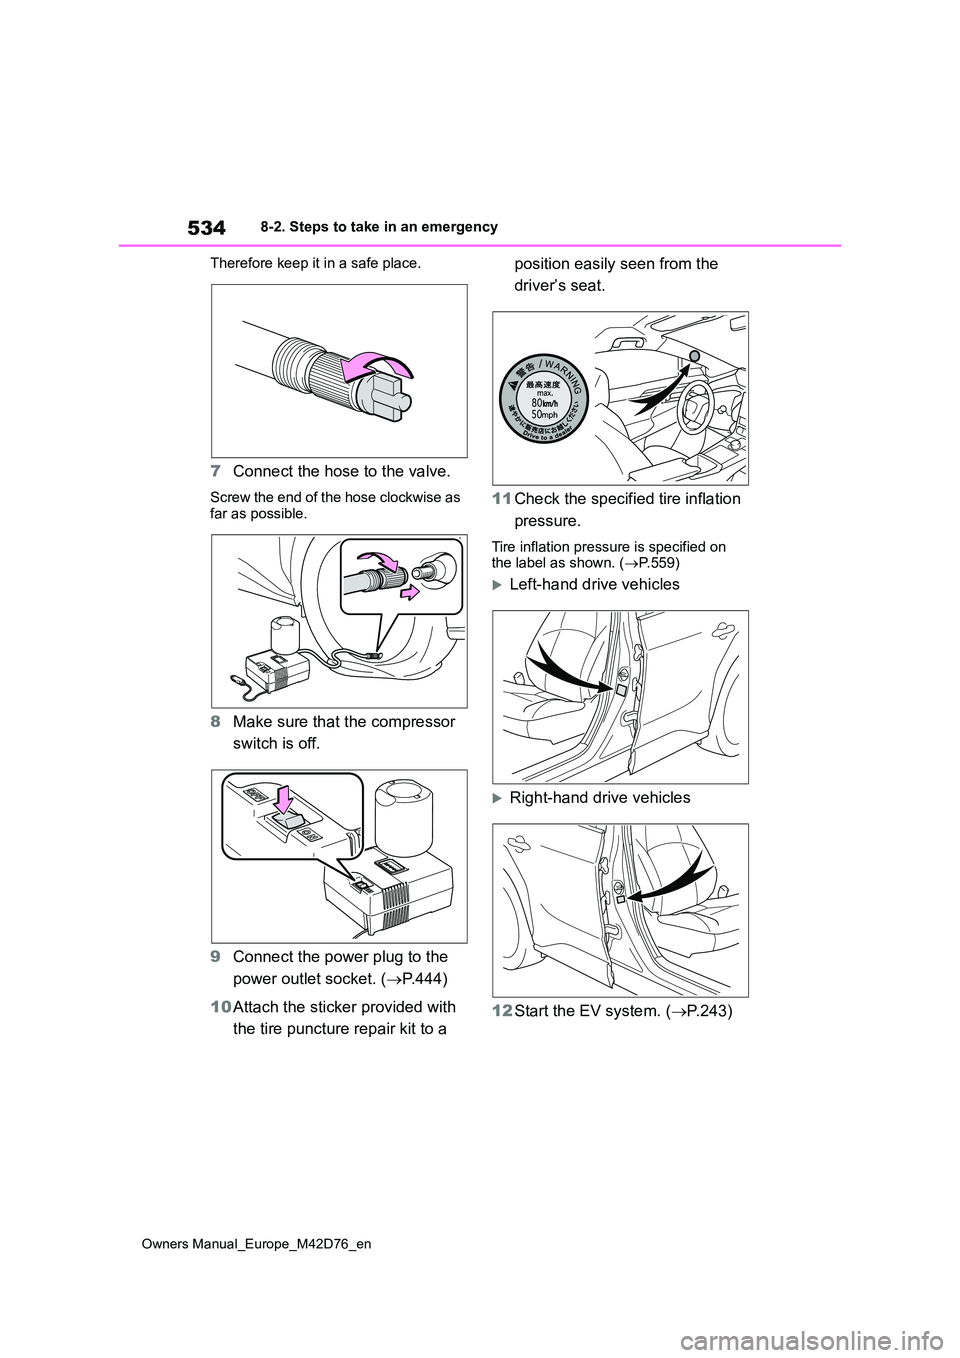 TOYOTA BZ4X 2022  Owners Manual (in English) 534
Owners Manual_Europe_M42D76_en
8-2. Steps to take in an emergency 
Therefore keep it in a safe place.
7 Connect the hose to the valve.
Screw the end of the hose clockwise as  
far as possible.
8 M